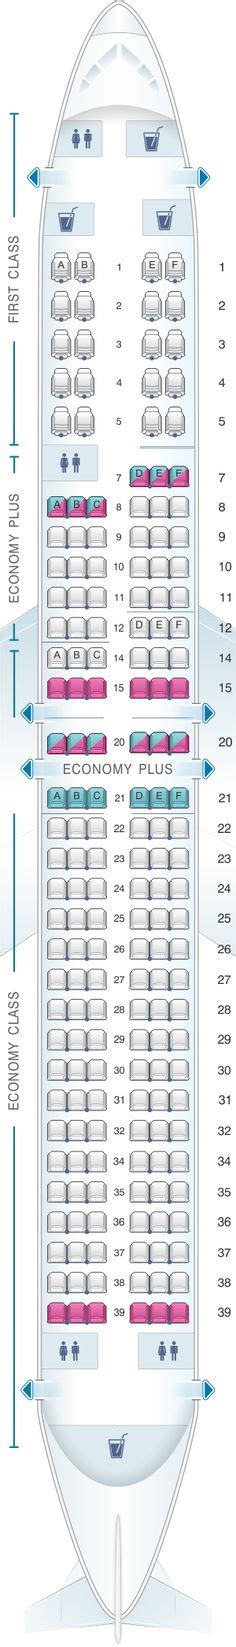 Airplanes Seat Mapsamerican Airlines